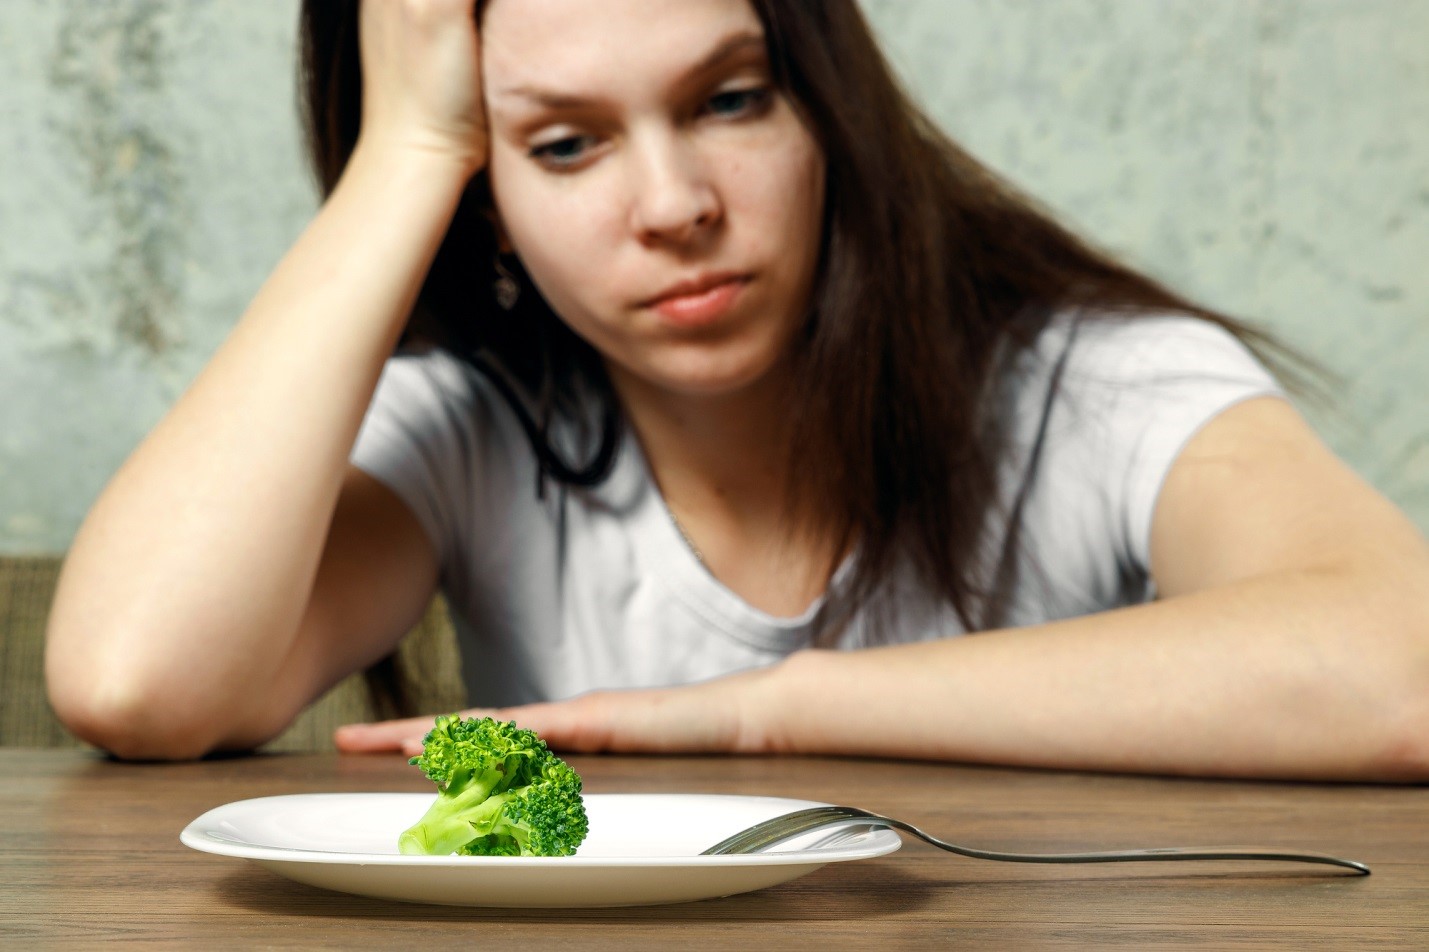 Why Are Eating Disorders More Common In Females Your Questions Answered